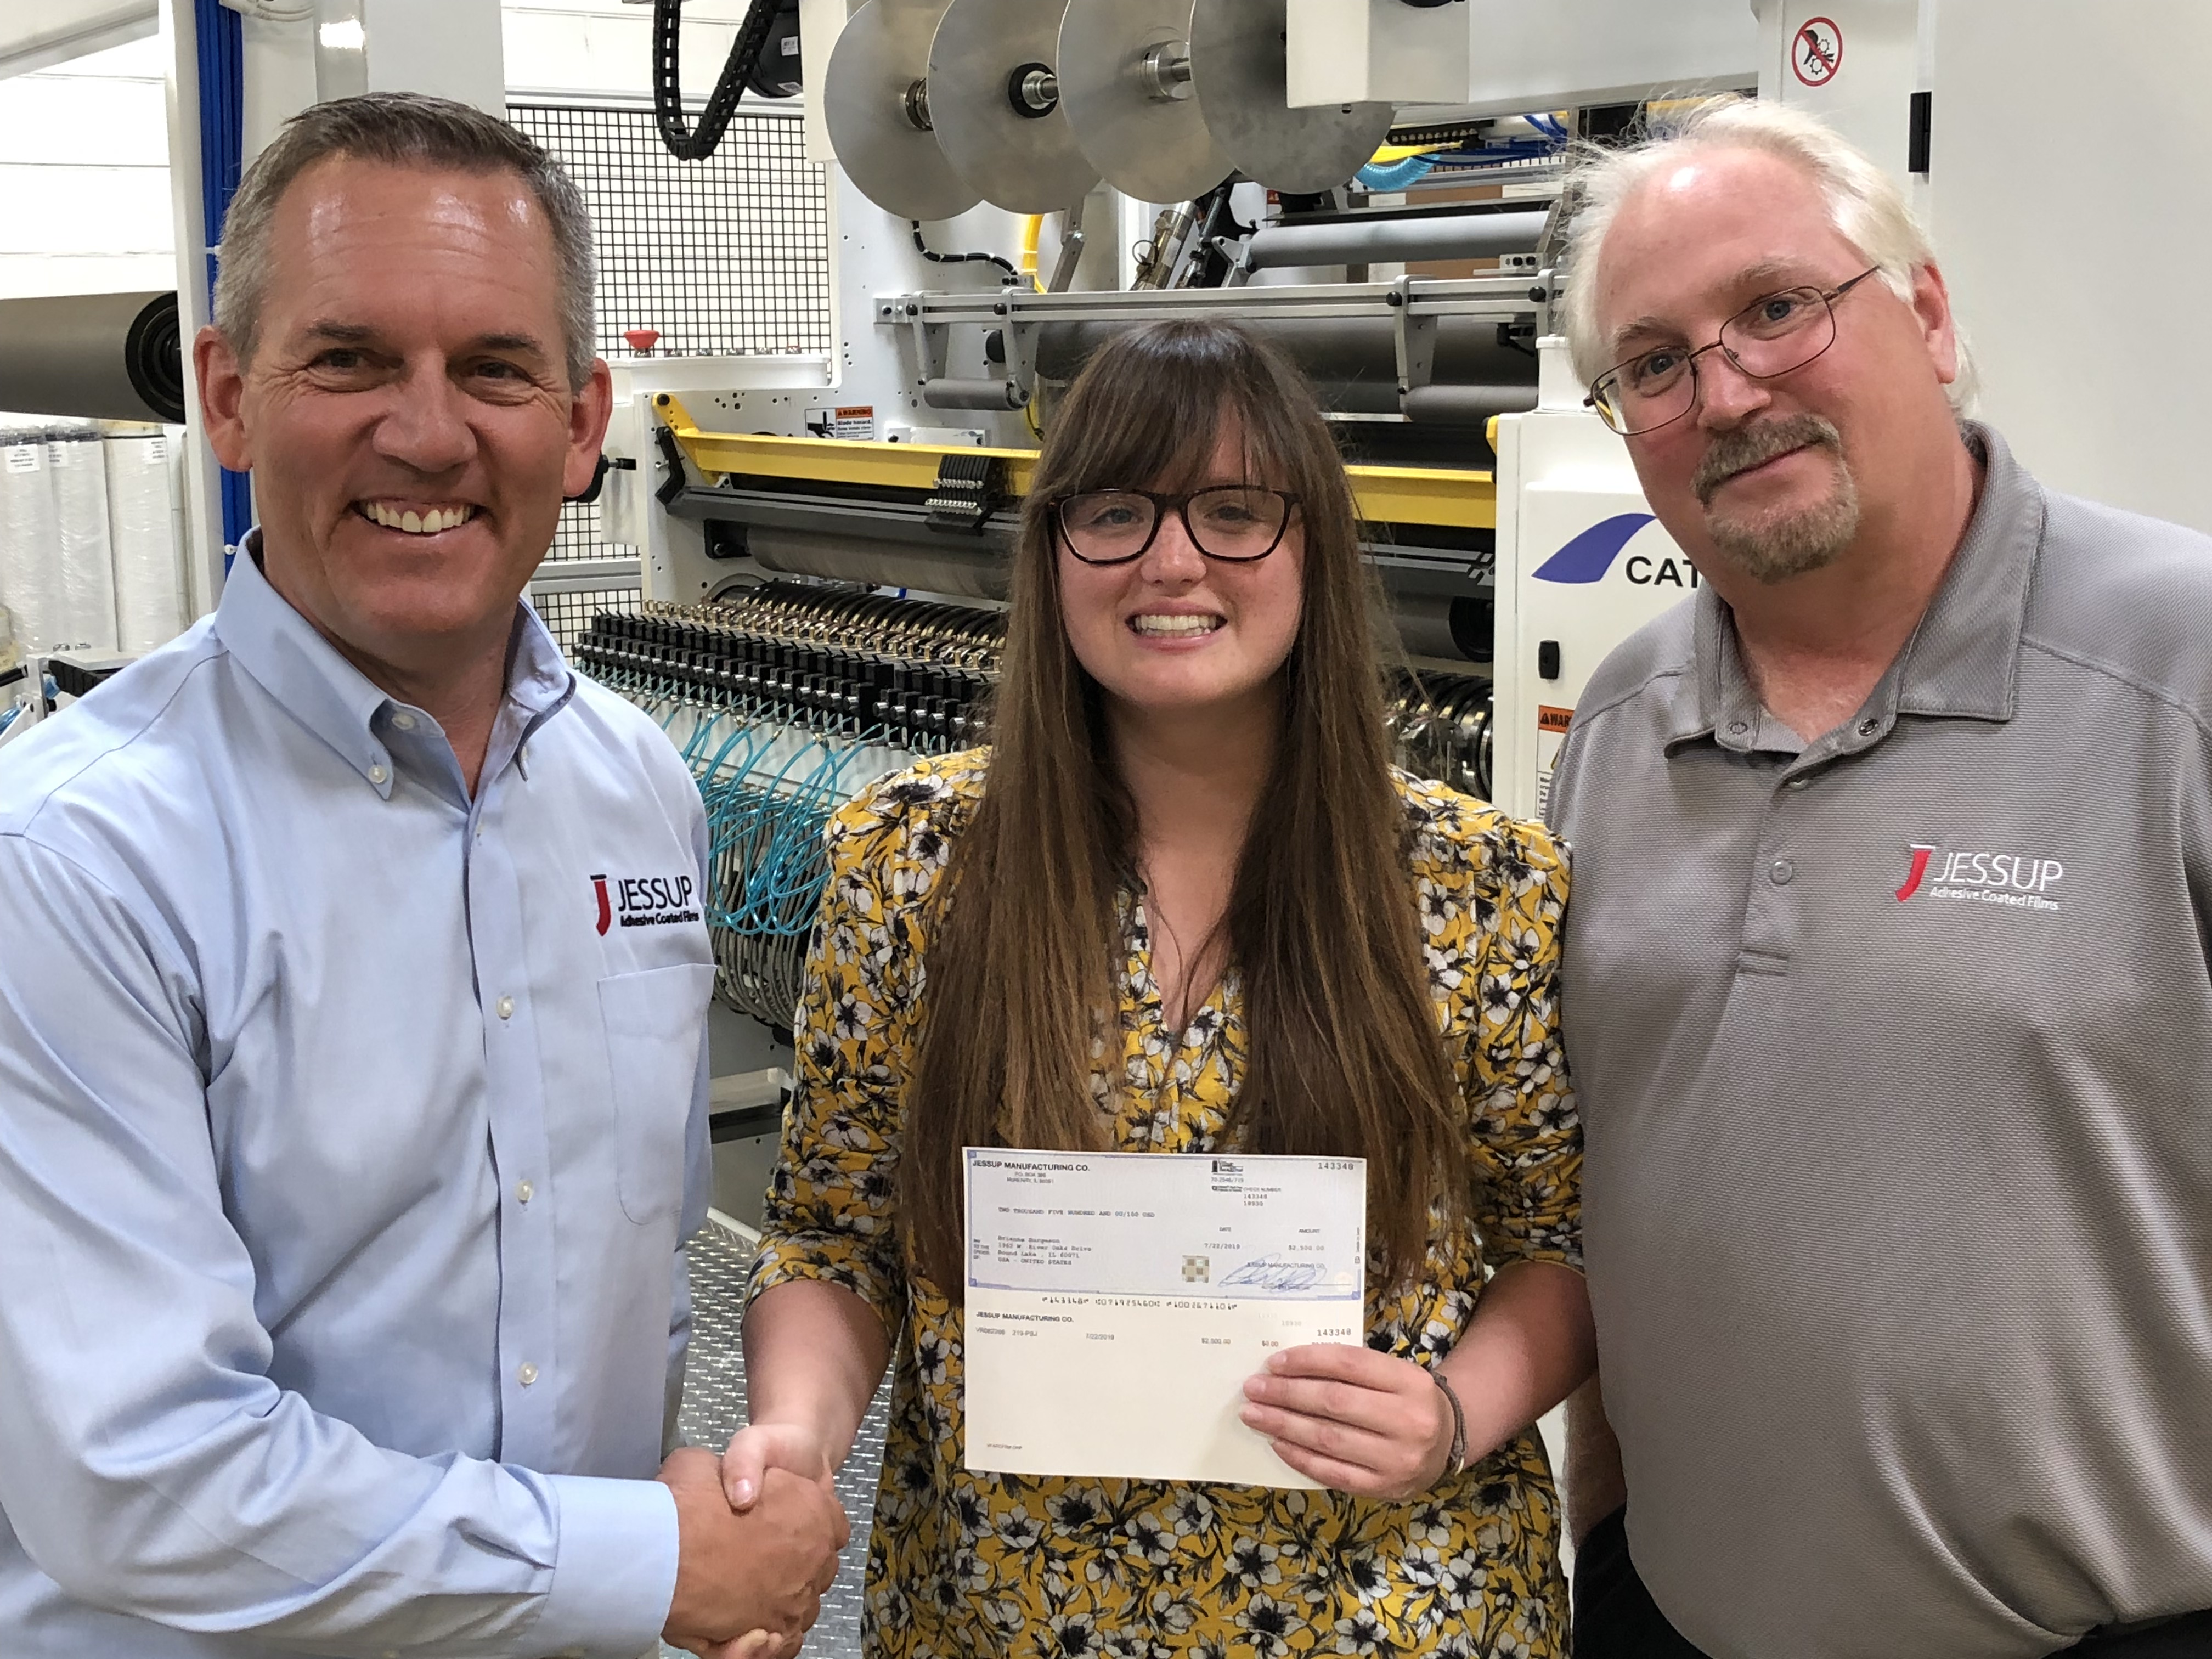 Brianna Burgeson of Round Lake, Illinois receiving a scholarship from Robert A. Jessup, President and CEO of Jessup Manufacturing.